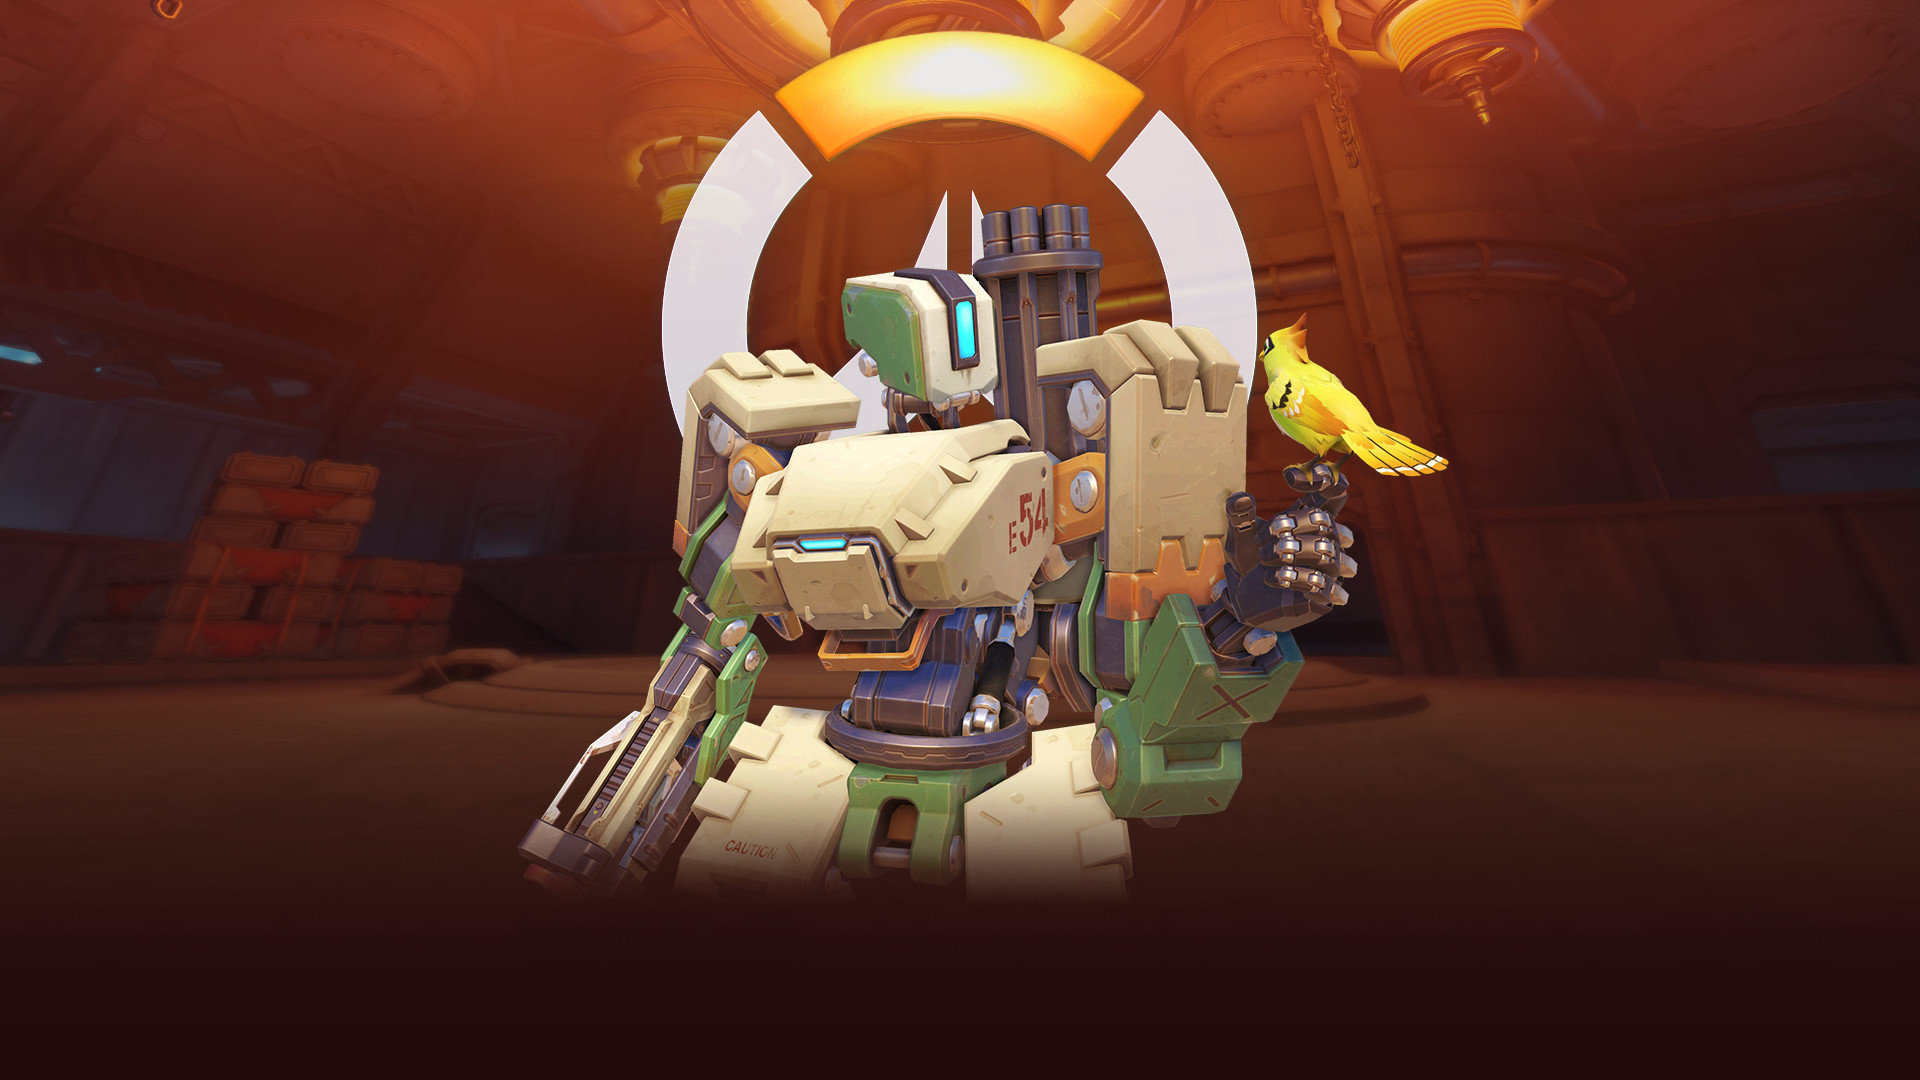 Best Bastion Wallpaper Id - Play Of The Game A Fucking Robot - HD Wallpaper 